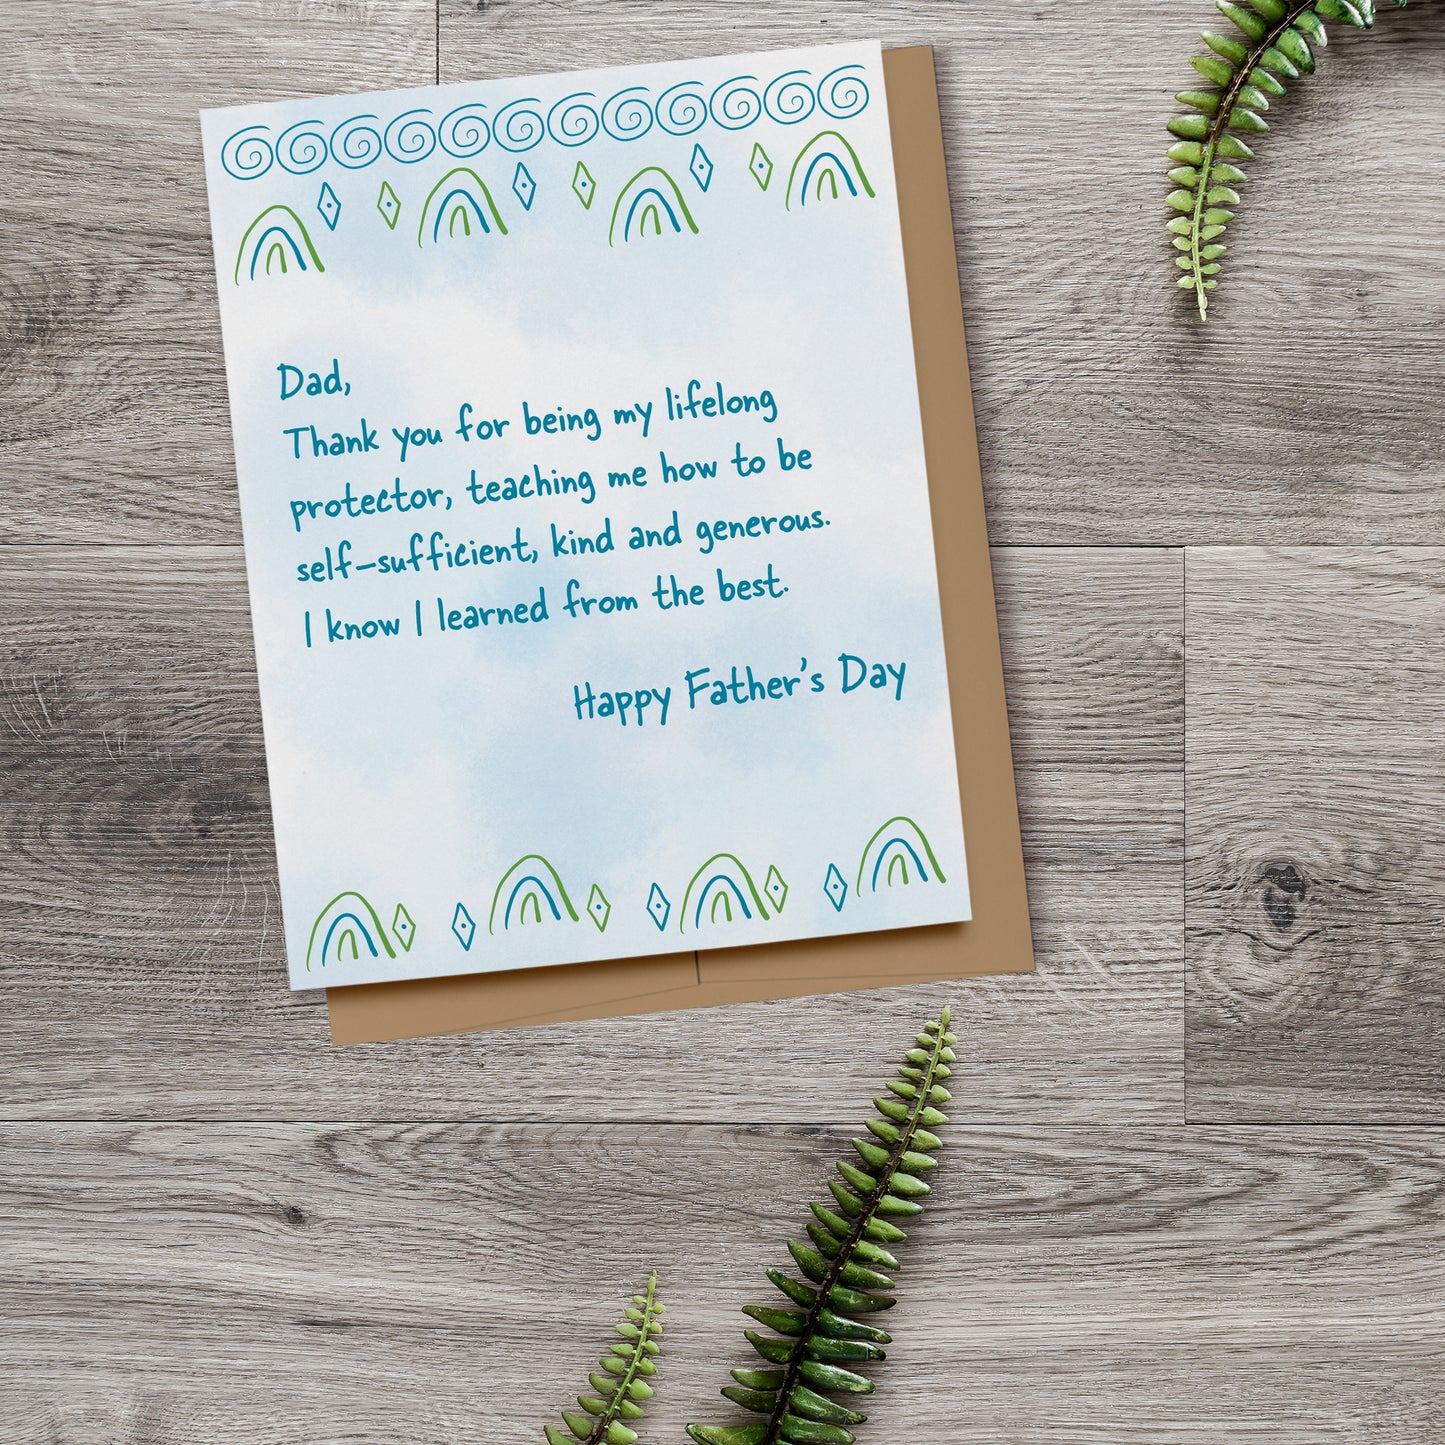 Simple Father's Day cards that reads, "Dad, Thank you for being my lifelong protector, teaching me how to be self-sufficient, kind and generous. I know I learned from the best. Happy Father's Day." Displayed on a wood background with fern leaves.